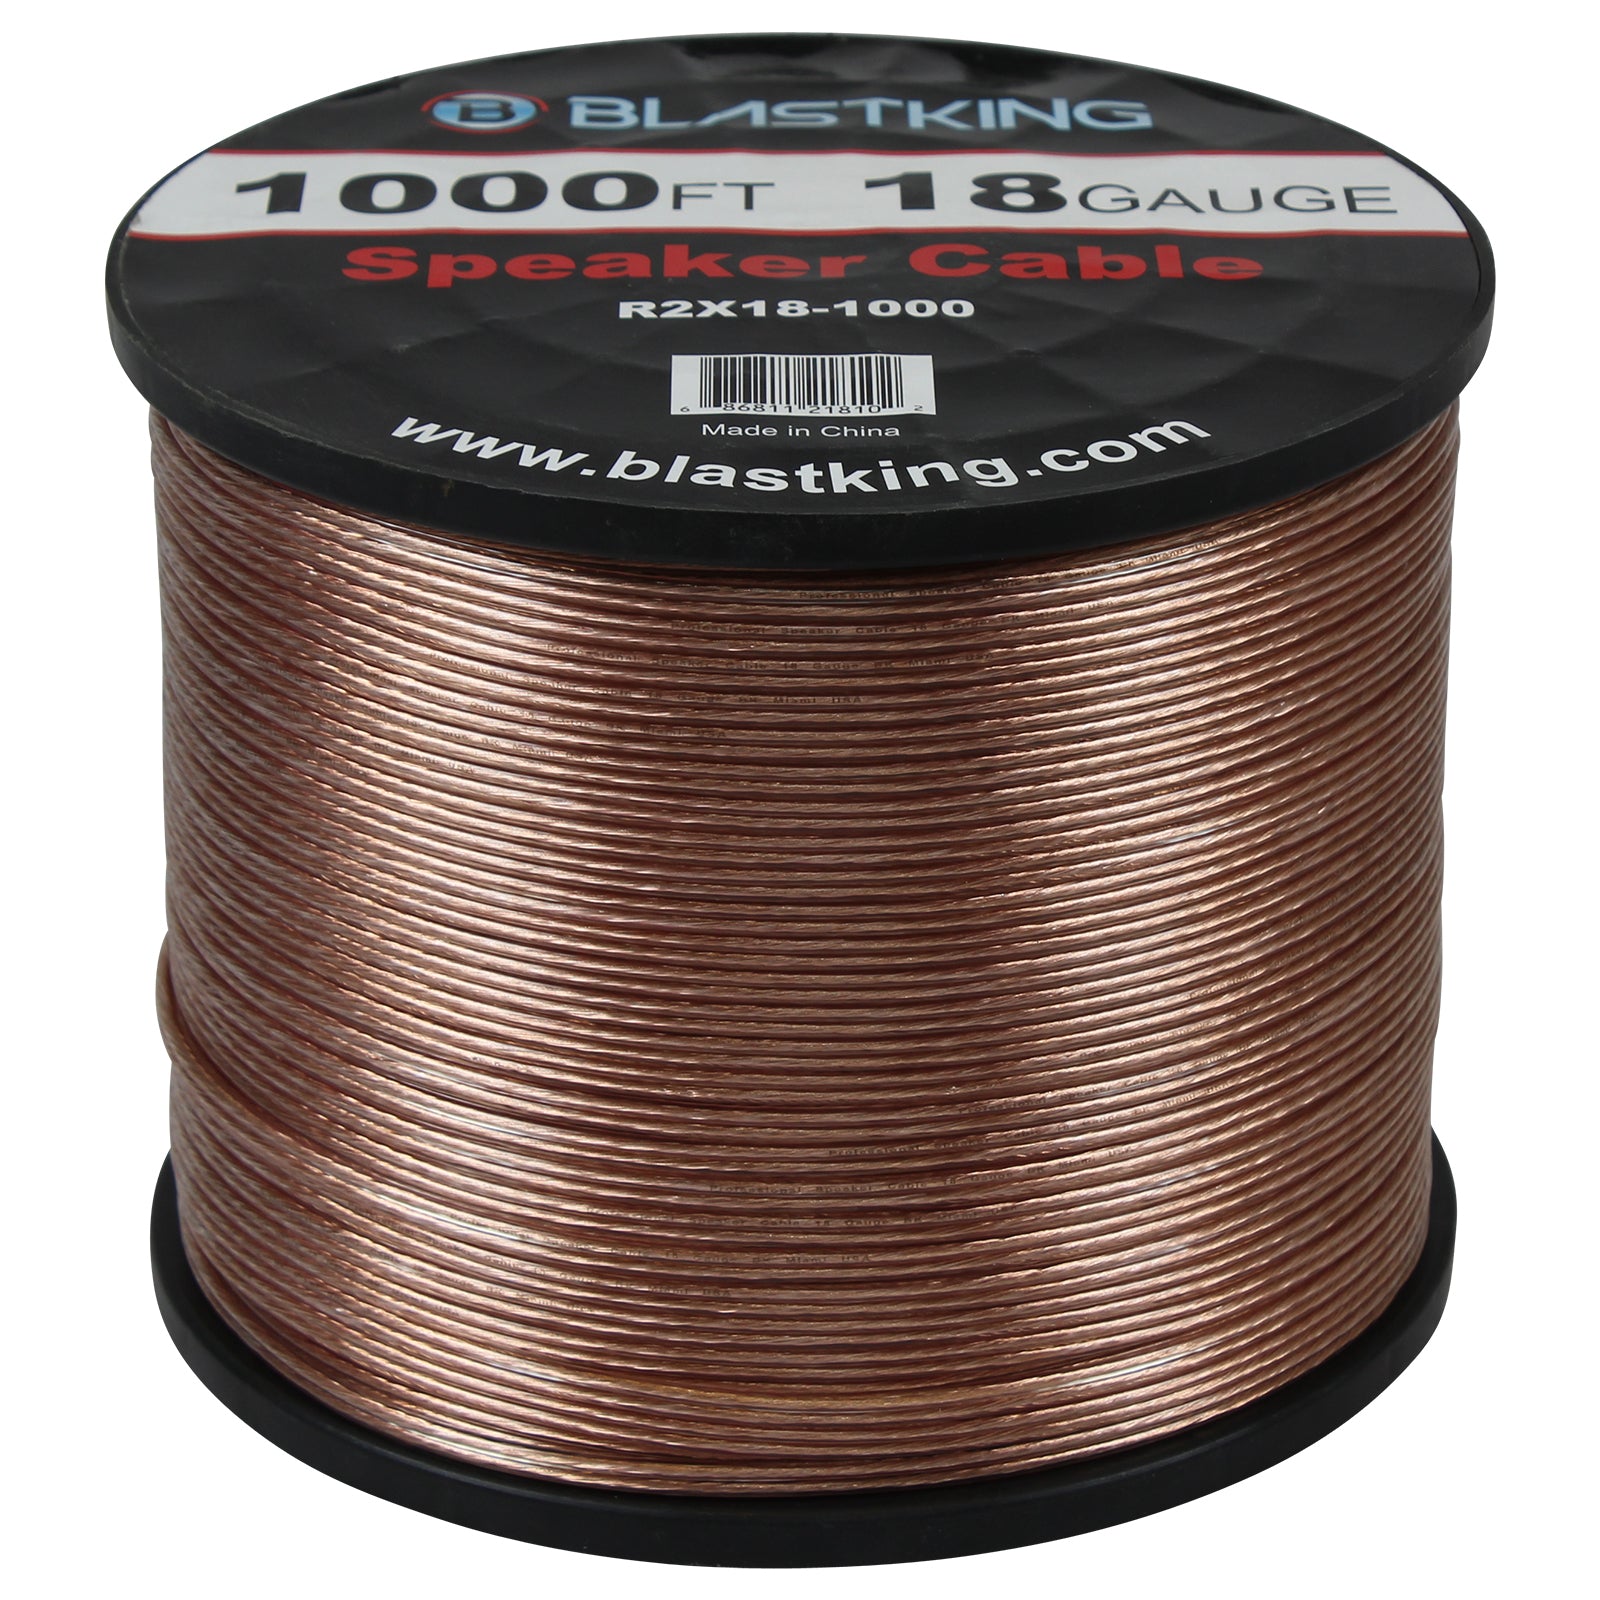 Blastking R2X18-1000 18 AWG 2-Conductor Speaker Cable 1000 Ft